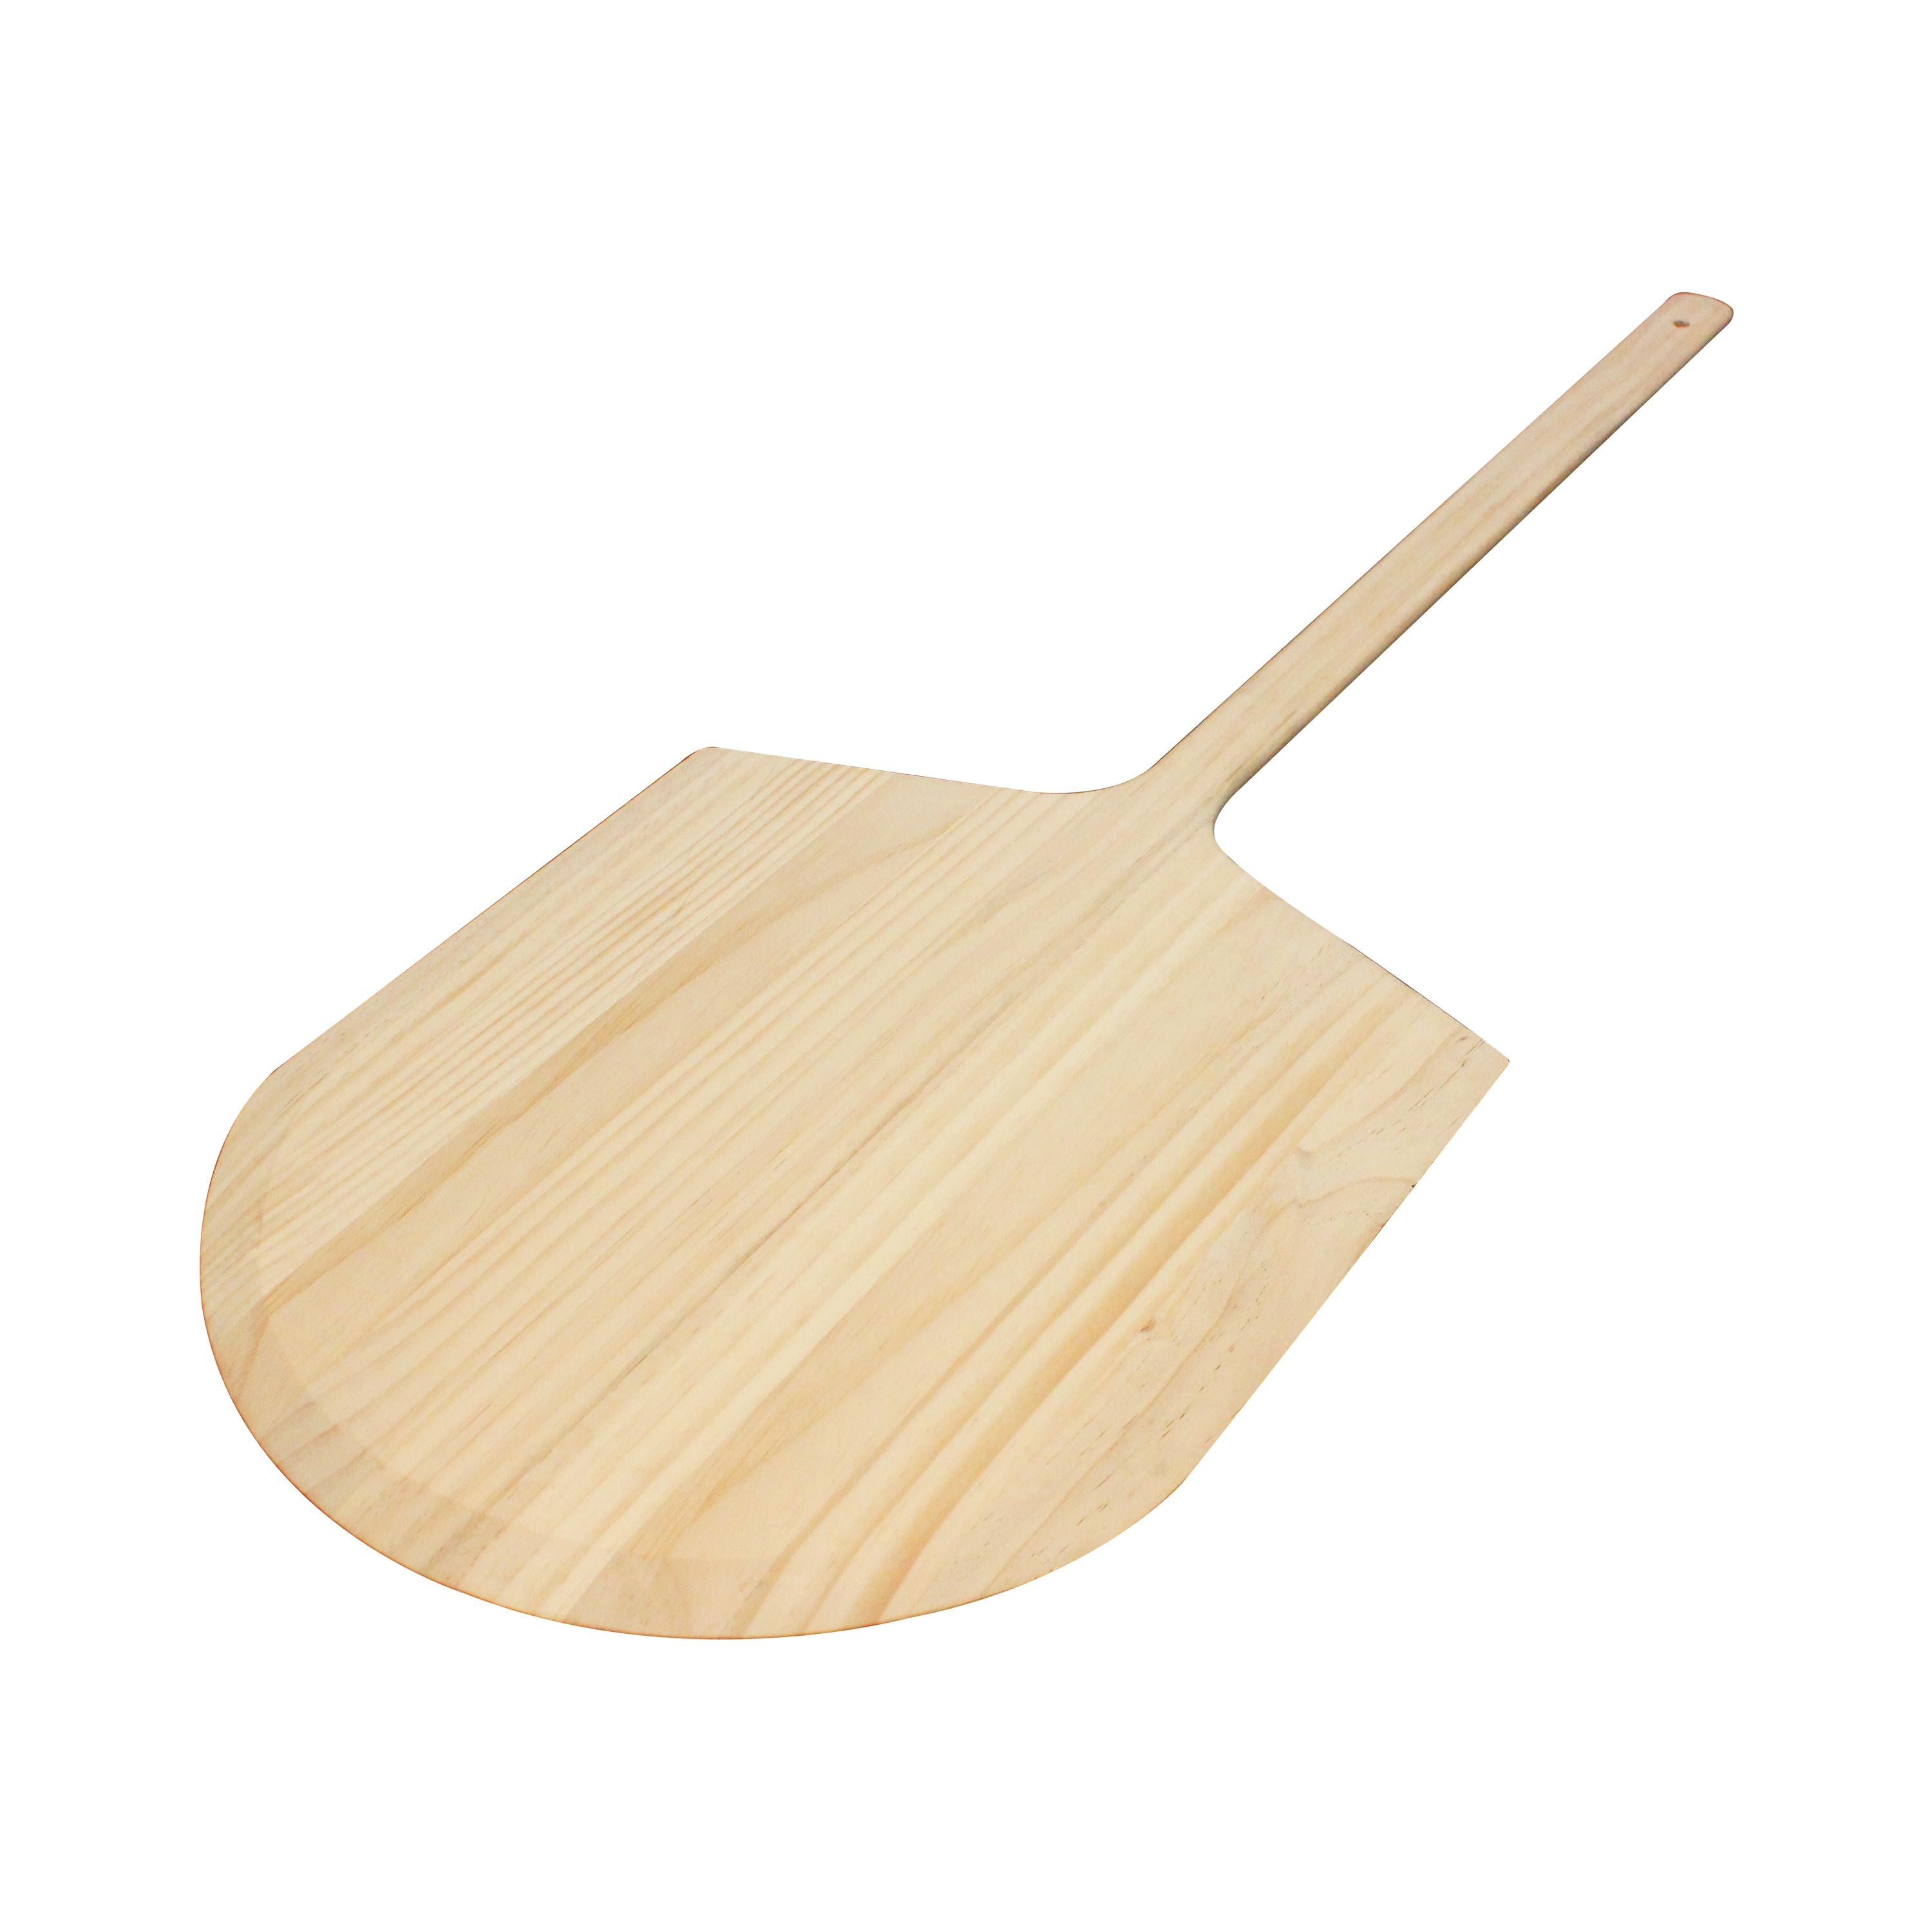 Thunder Group WDPP1842 Wooden Pizza Peel 18" X 18" Blade, 42" Overall Length